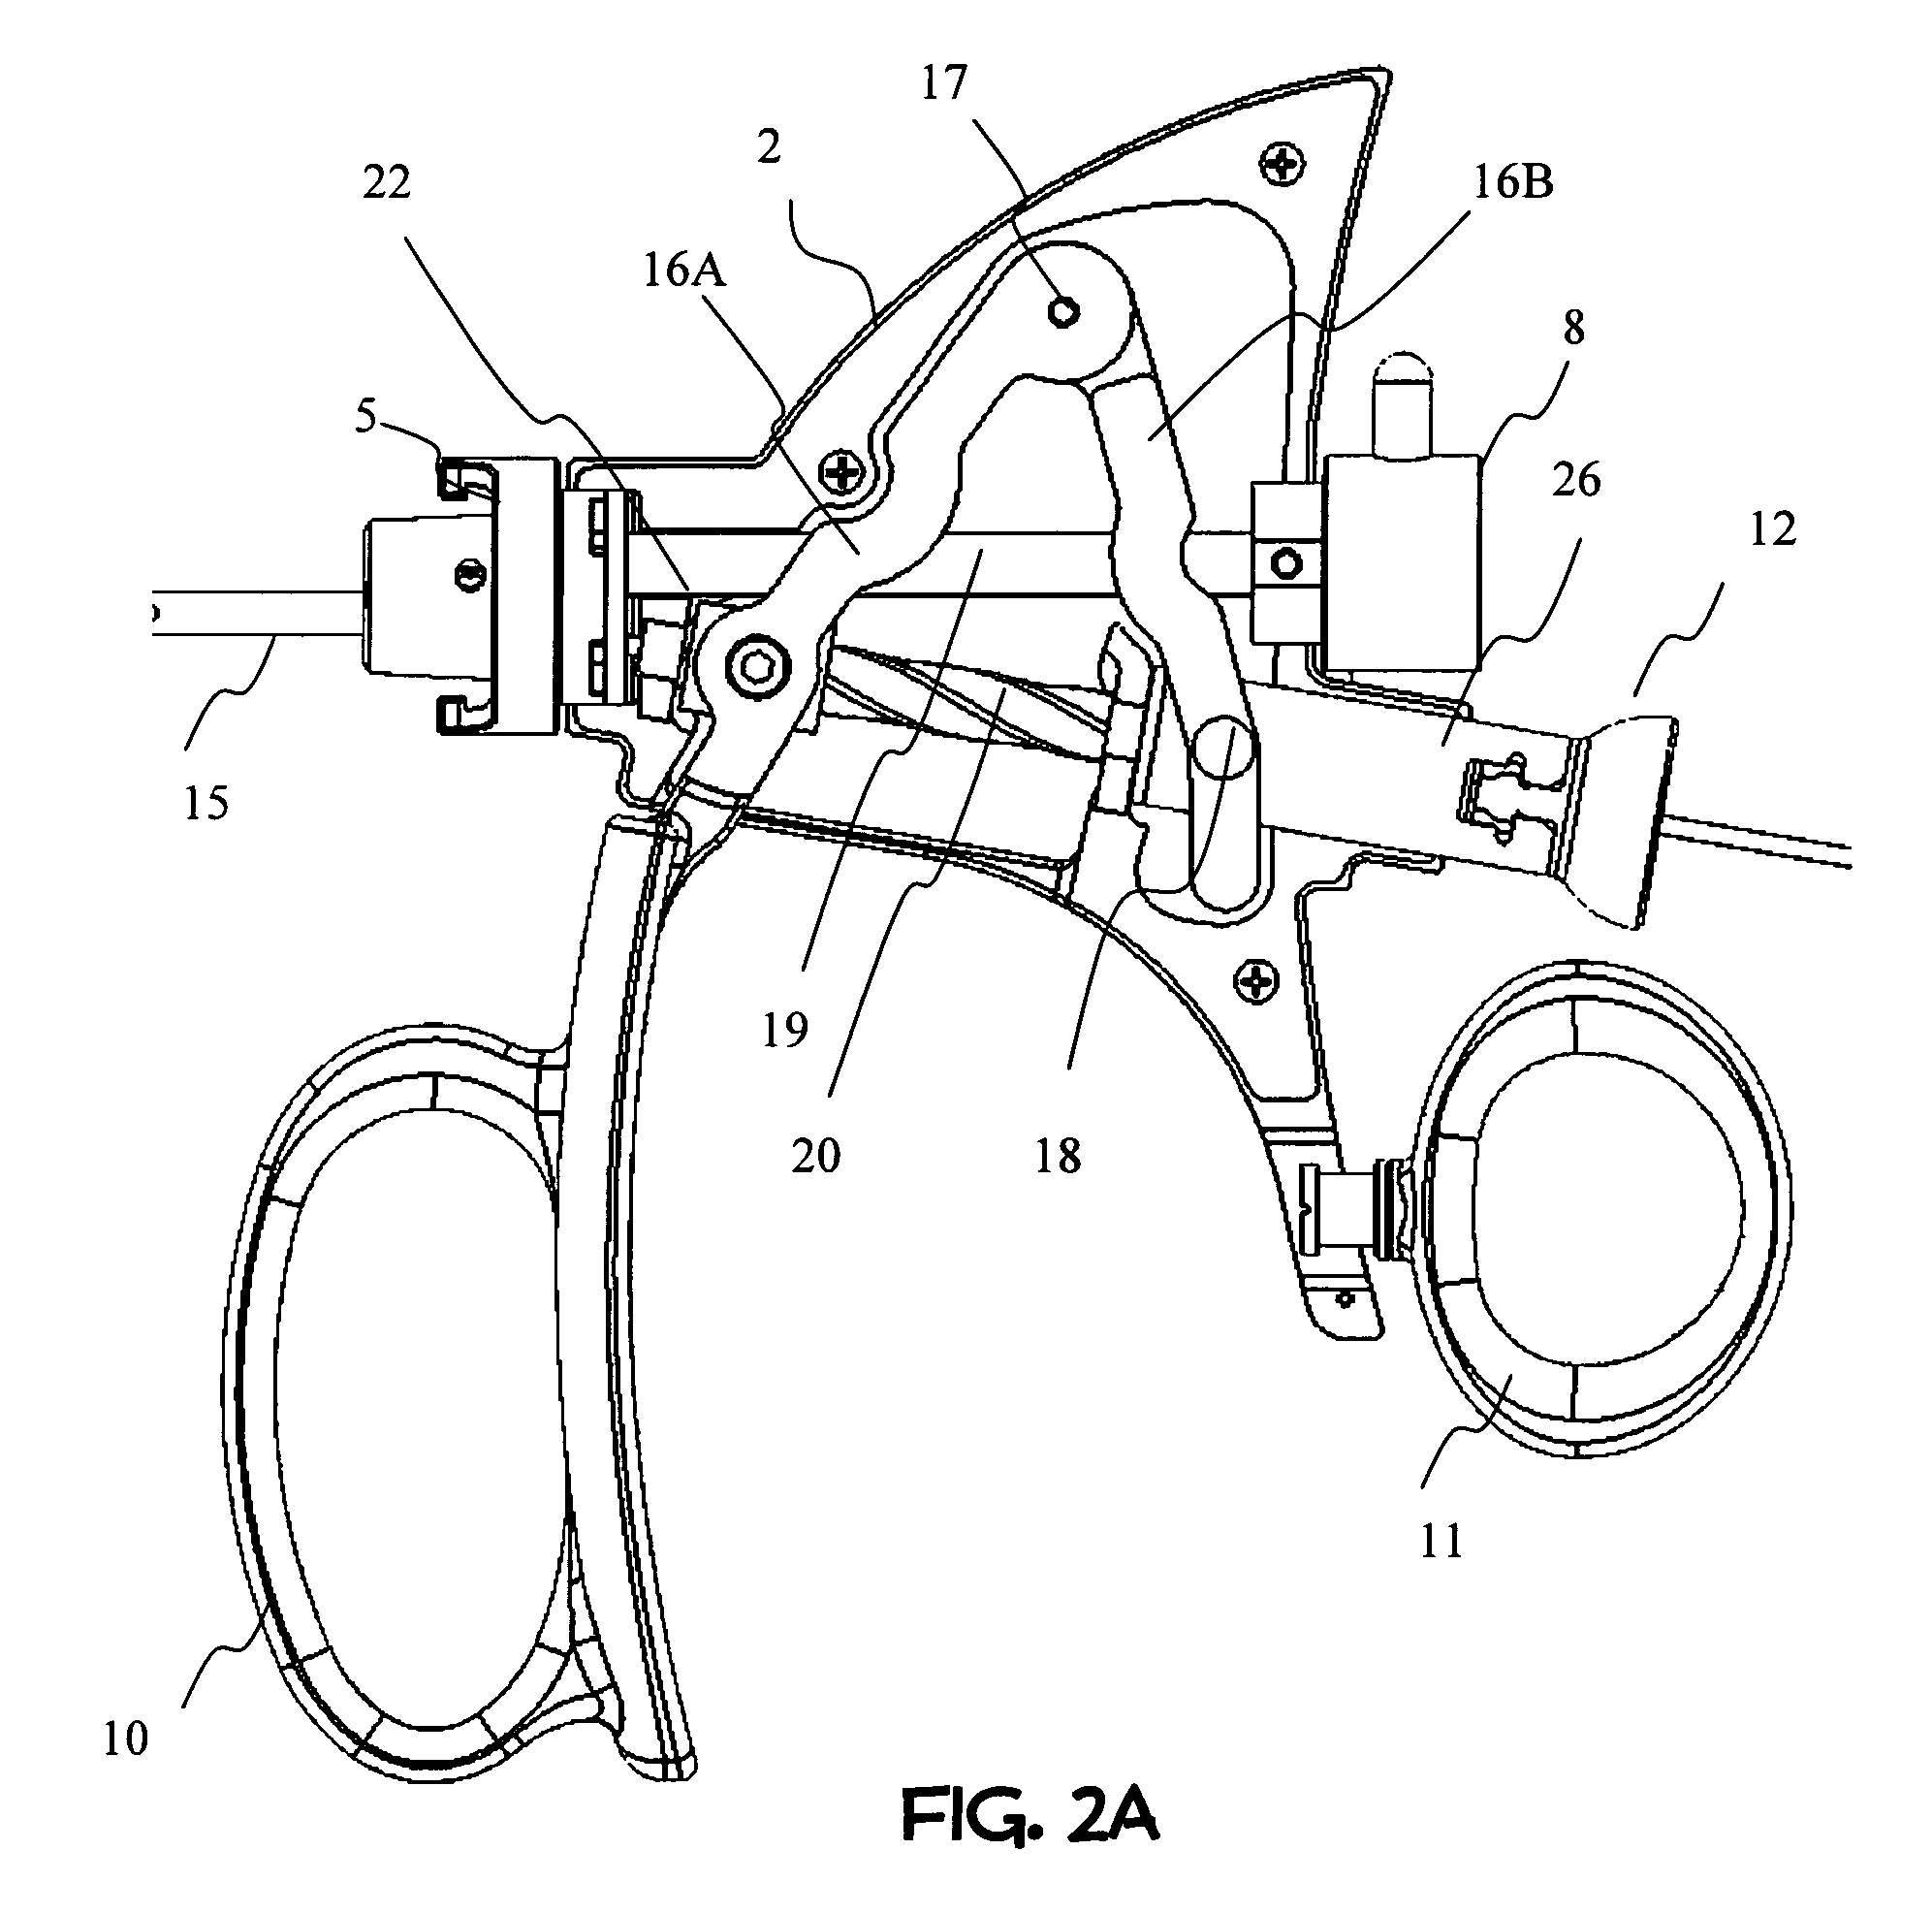 Working tool for laser-facilitated removal of tissue from a body cavity and methods thereof